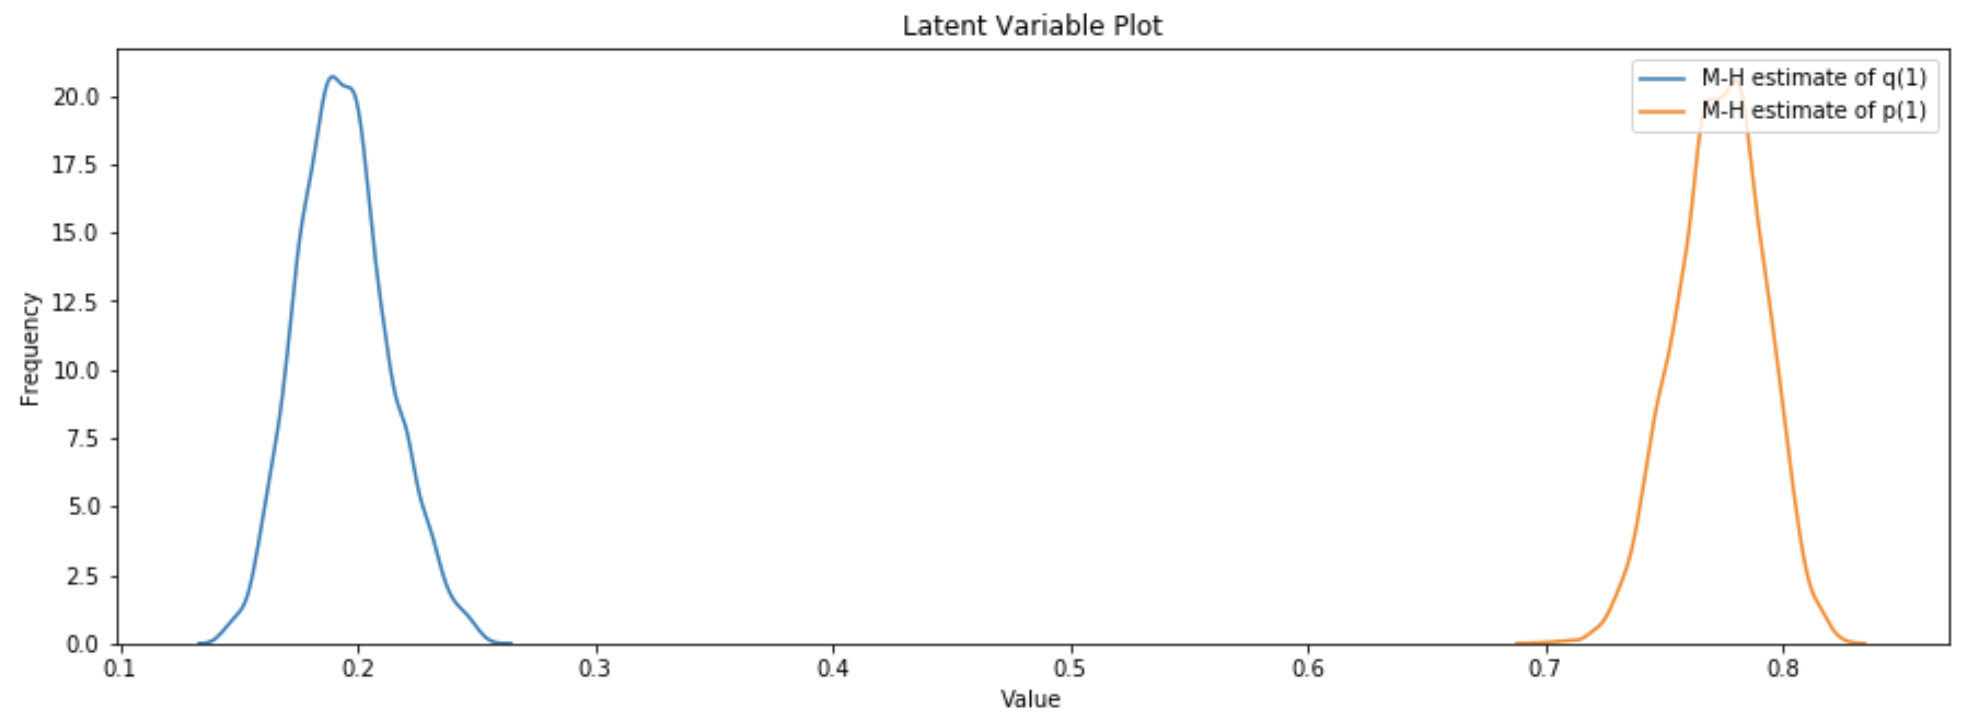 latent_variable